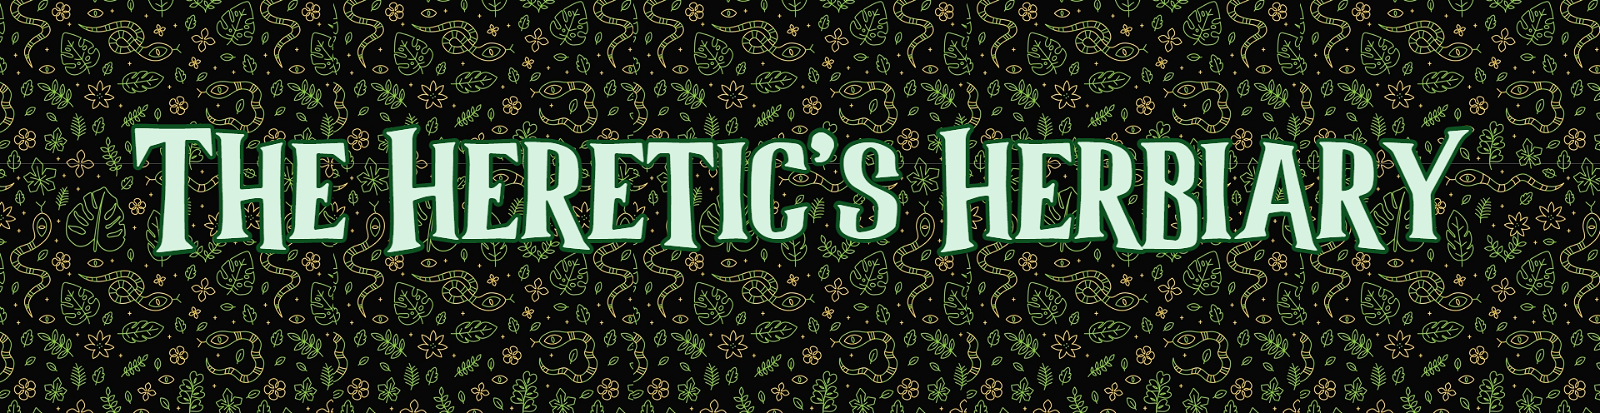 The Heretic's Herbiary vol #12